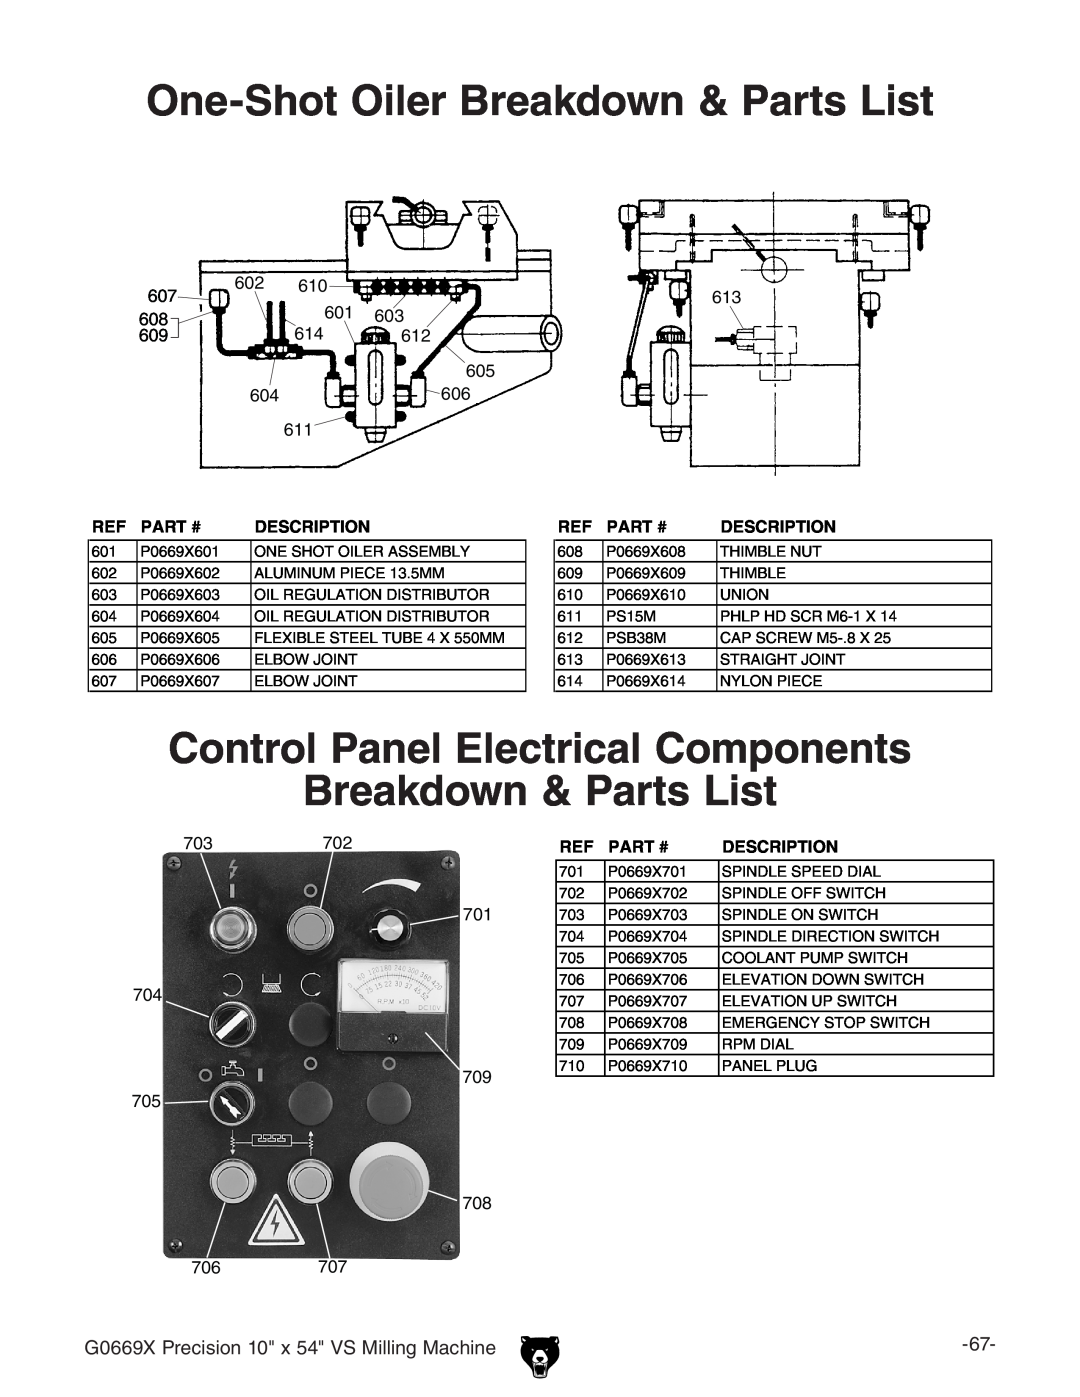 Grizzly g0669X One-Shot Oiler Breakdown & Parts List, Control Panel Electrical Components Breakdown & Parts List 